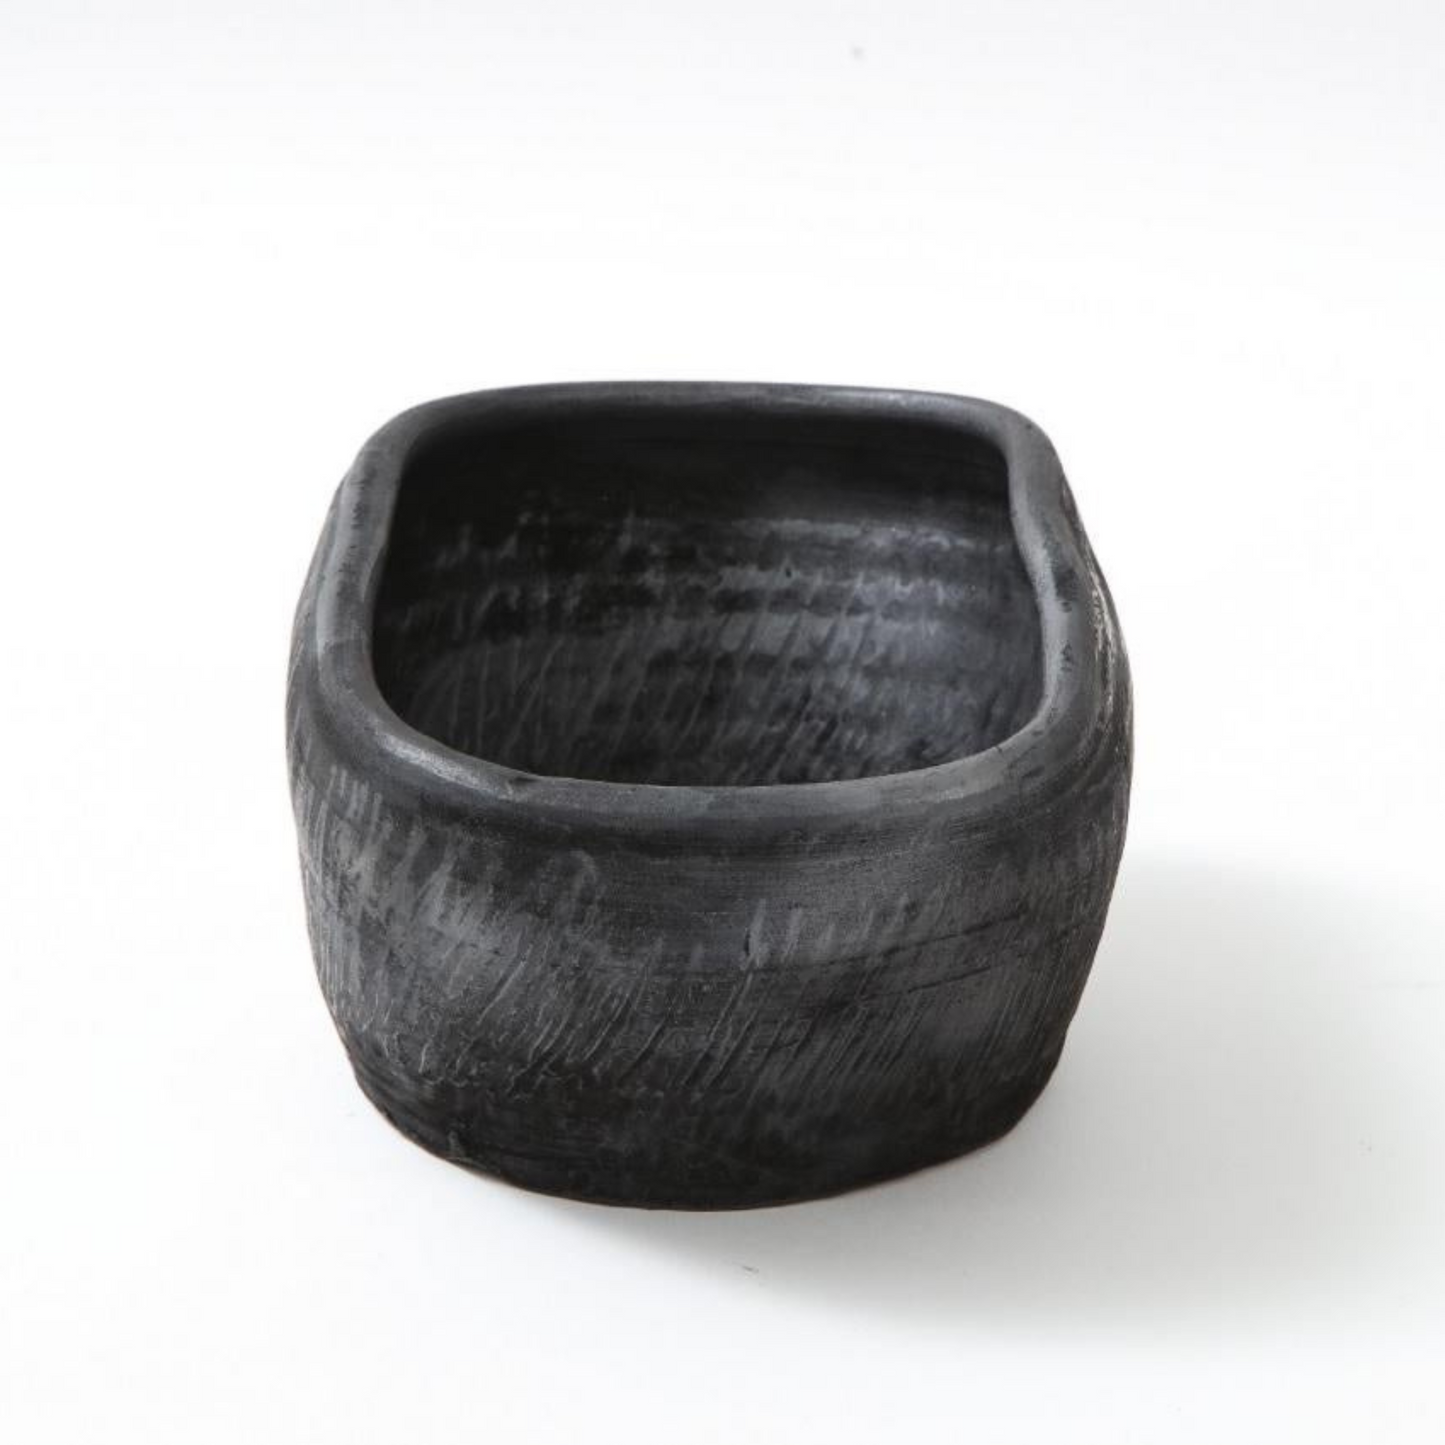 Charcoal and Silver Finish Terracotta "Carbone" Bowl by Facto Atelier Paris